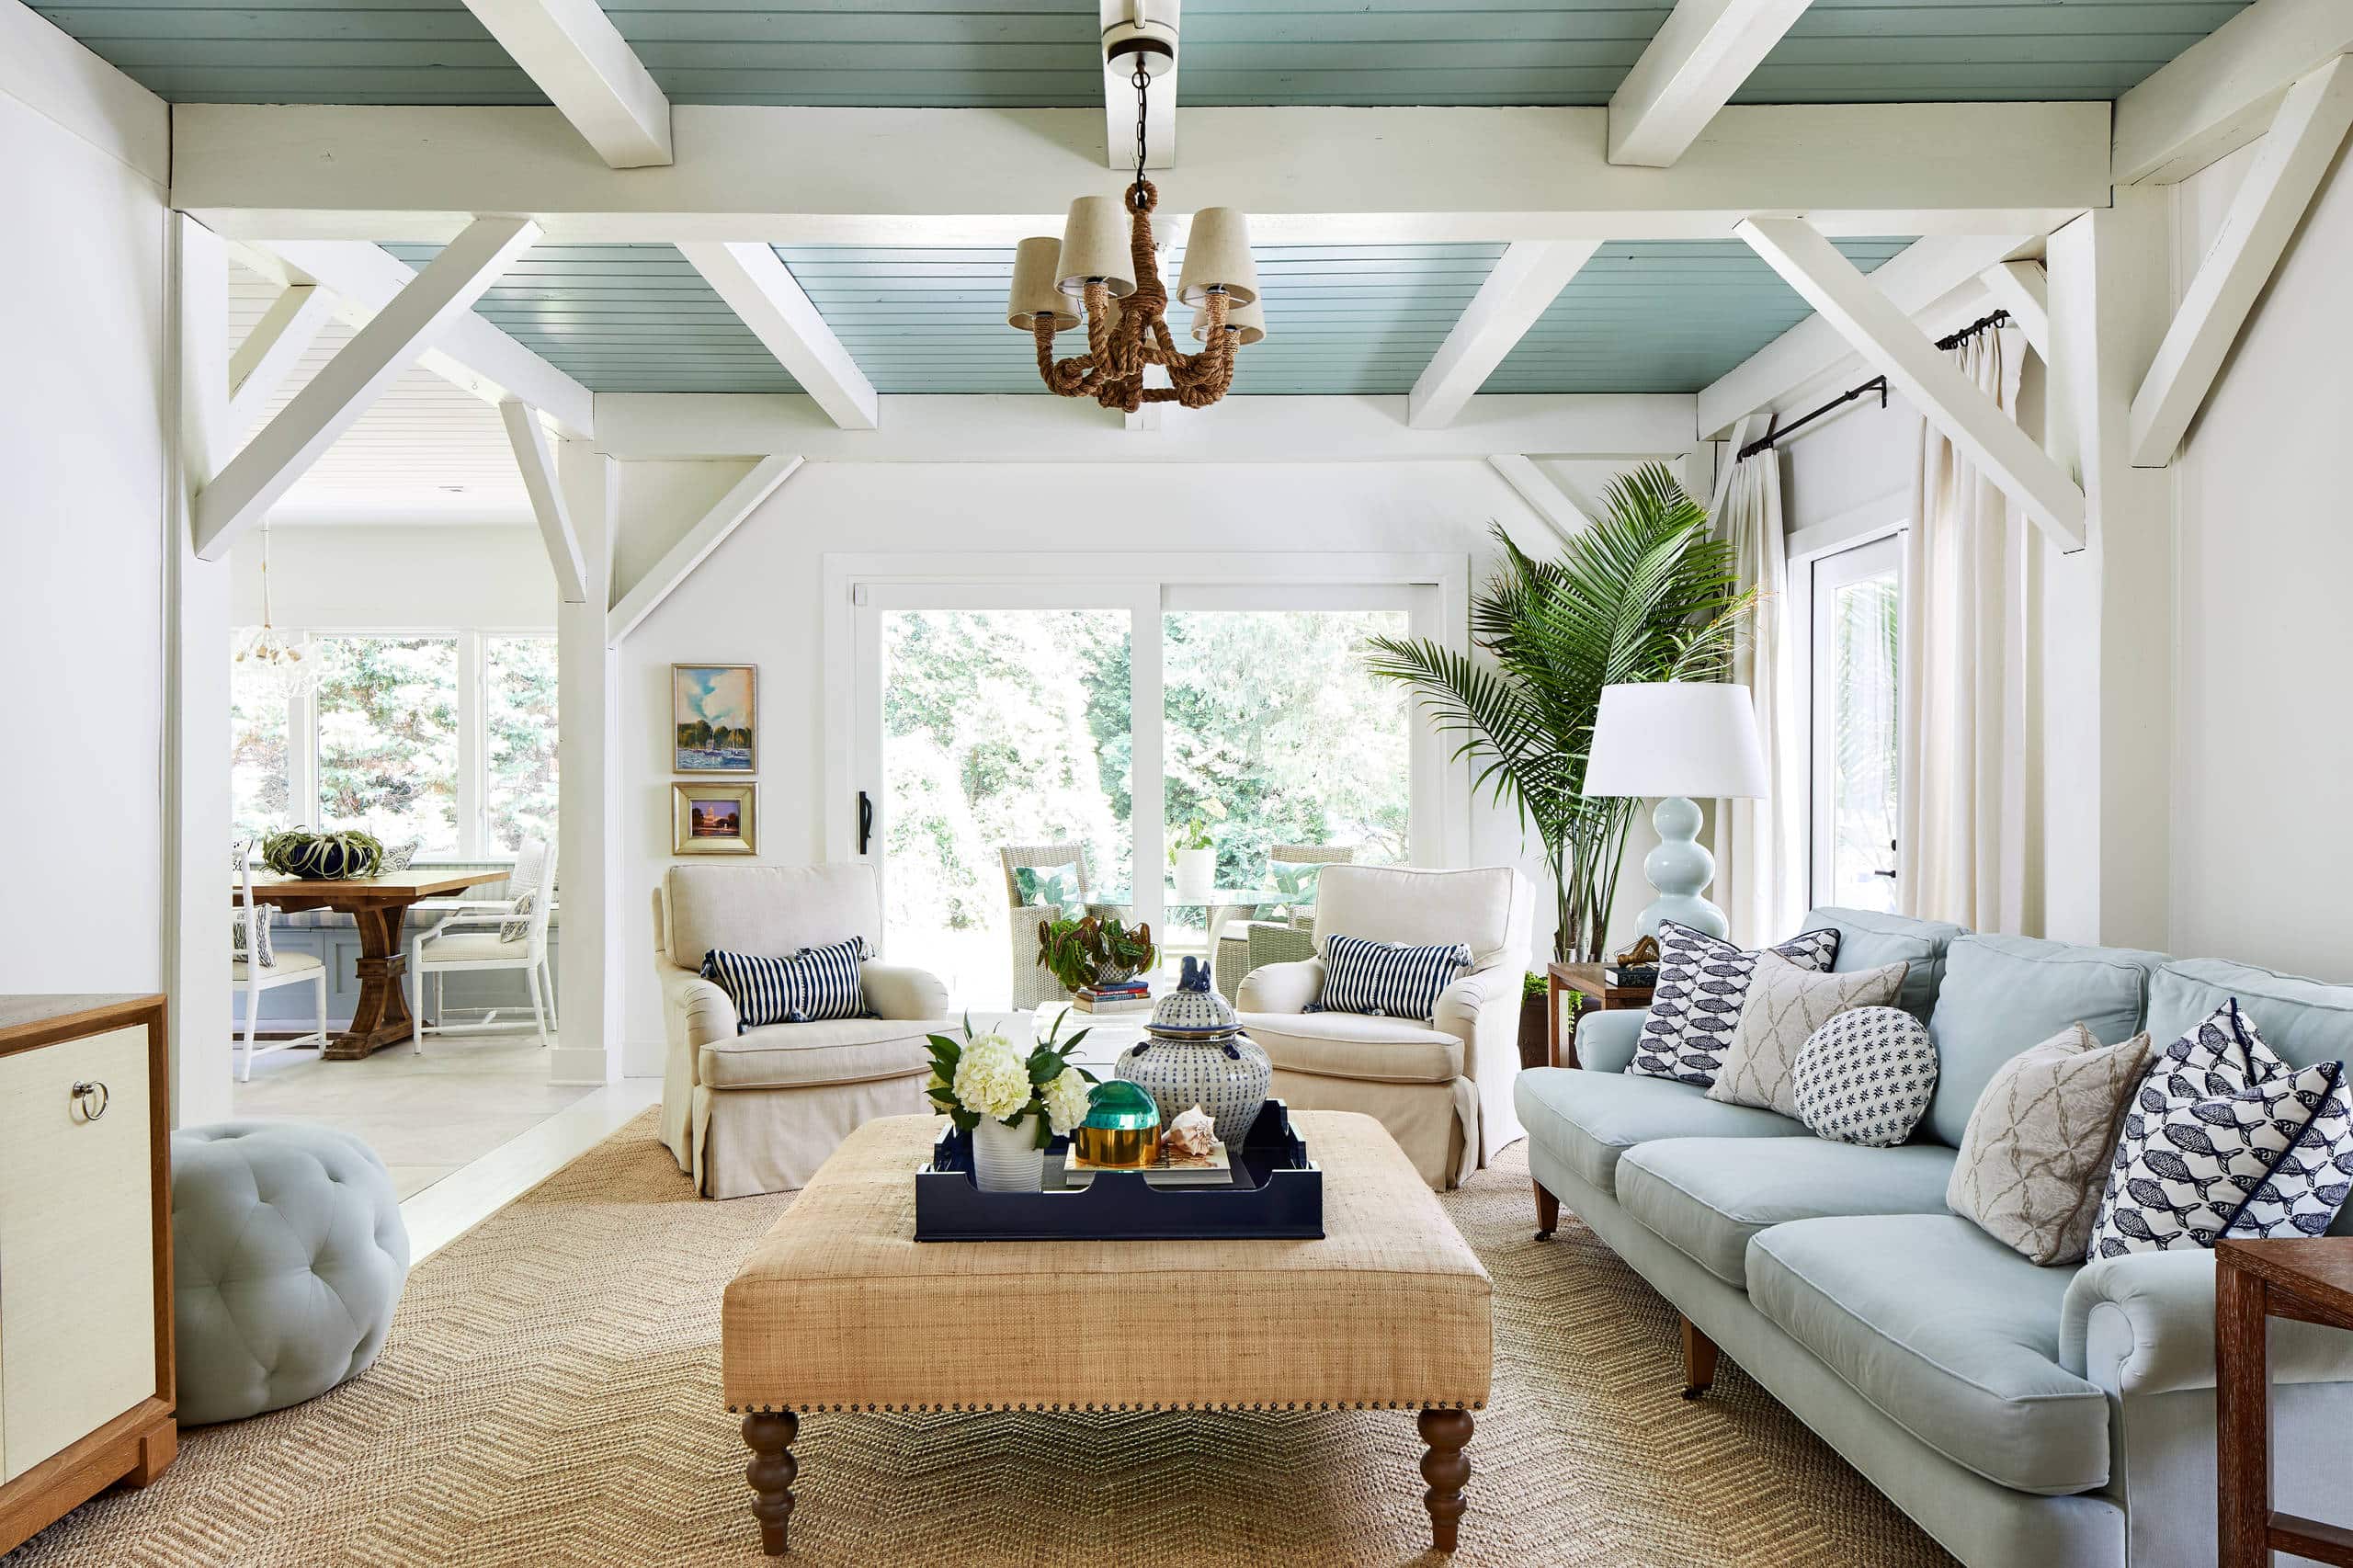 Gibson Island home tour featuring costal style interior decor